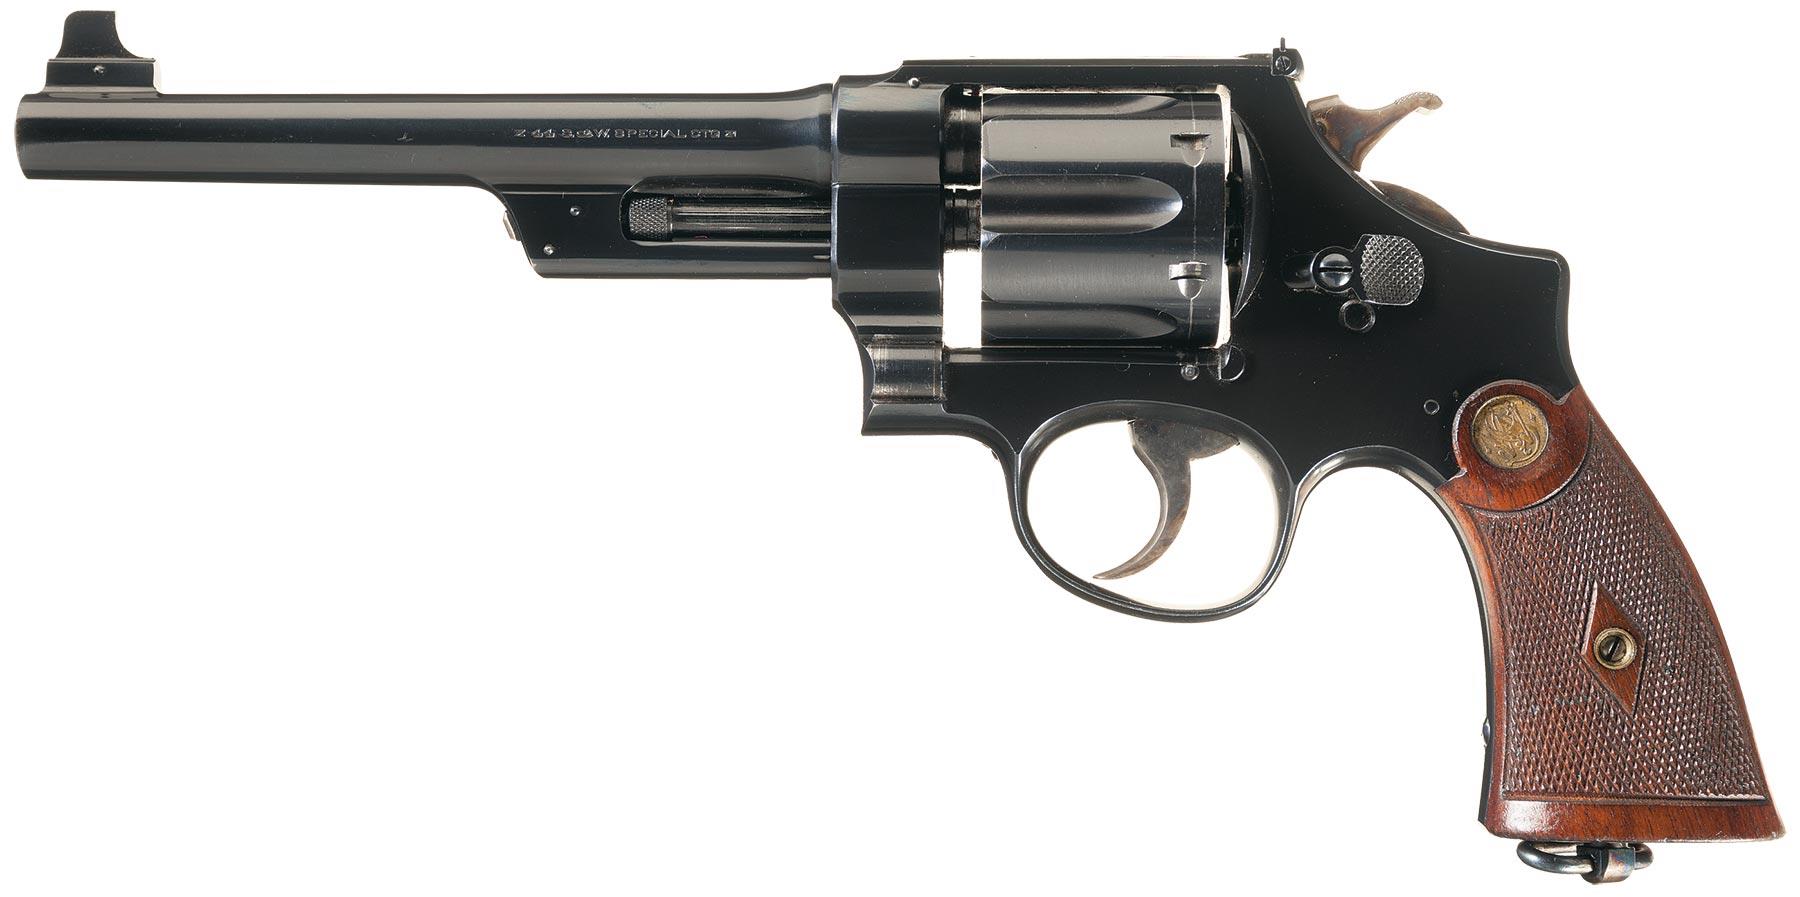 Smith and wesson model 14